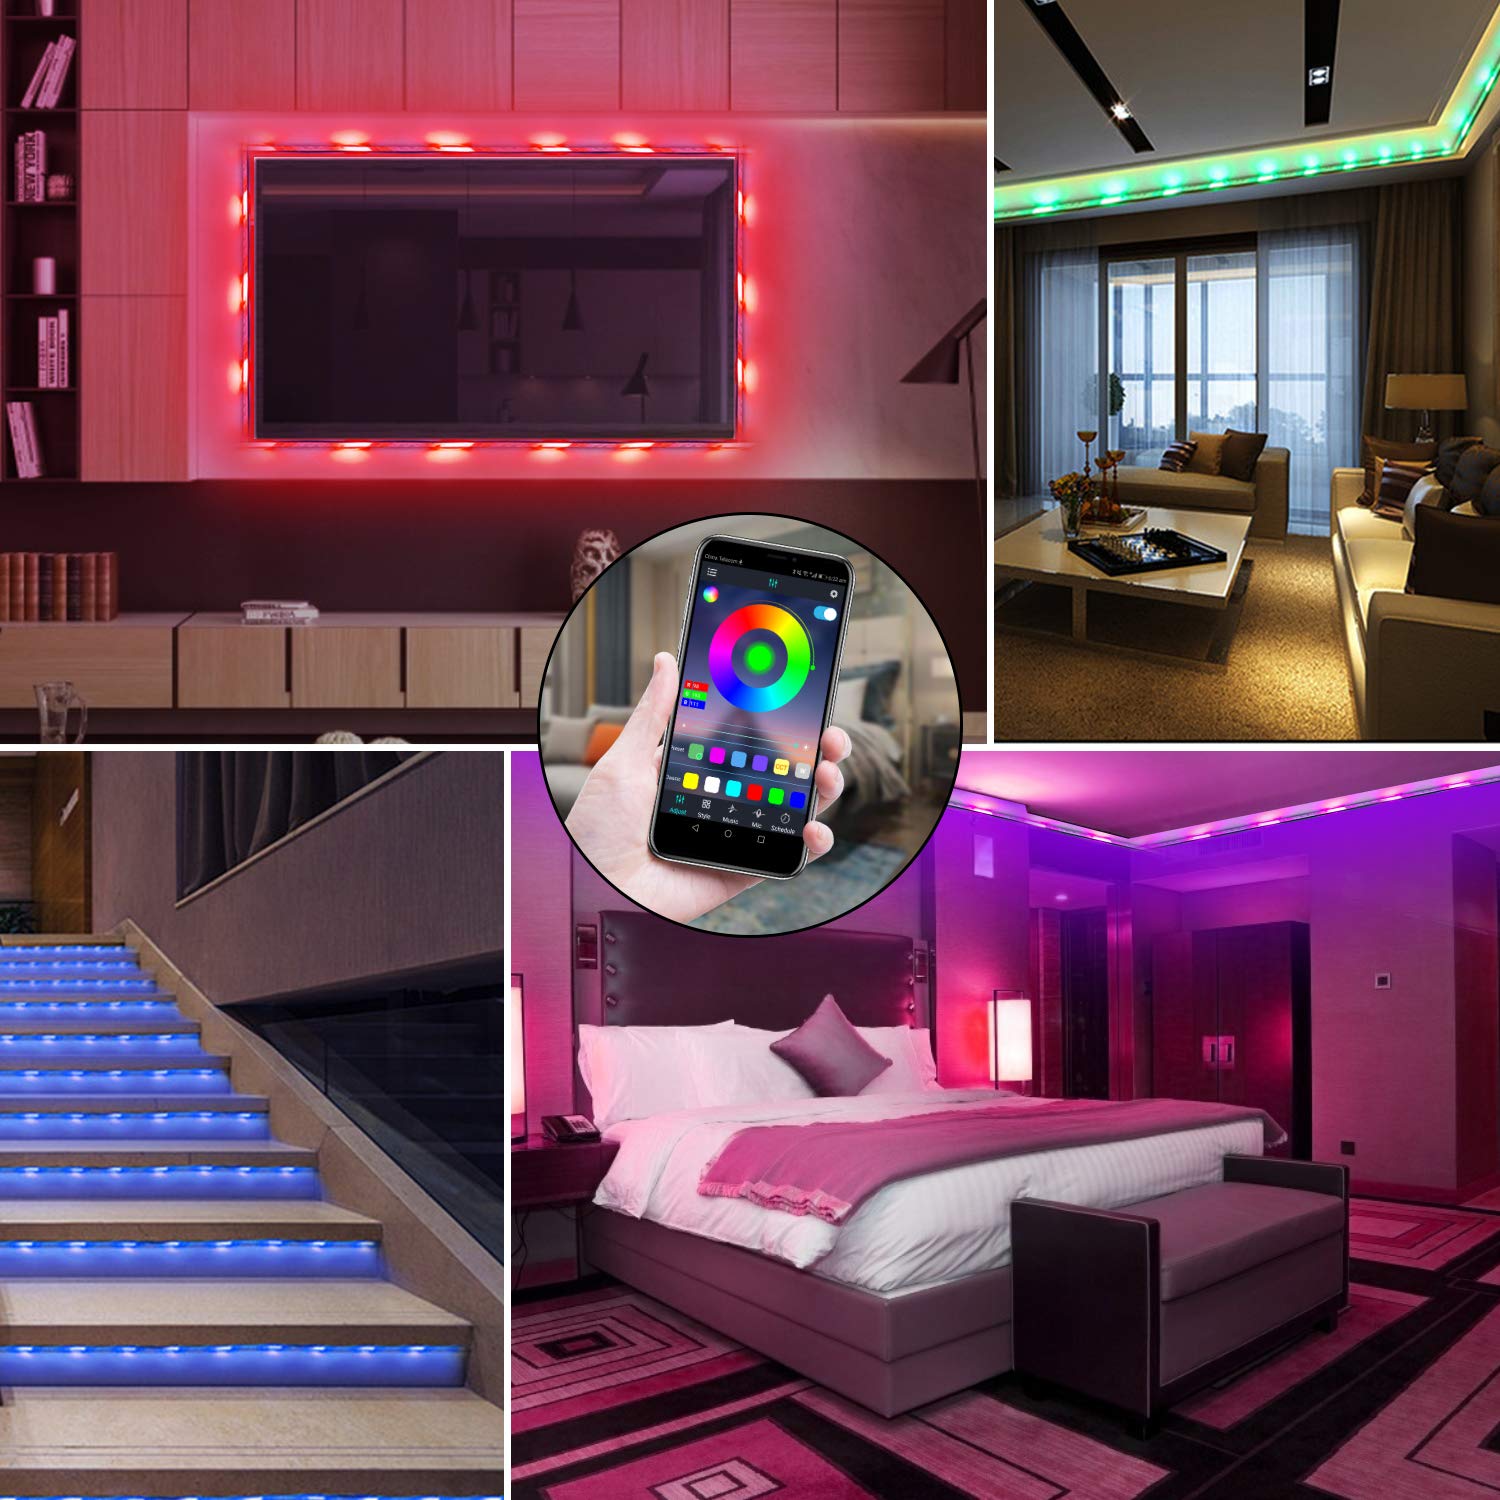 QZYL Led Lights for Bedroom,49.2 Feet Led Strip Lights,Music Sync Color Changing Flexible Rope Lights with Remote App Control Luces Led Strips Lights for Party Home Decoration